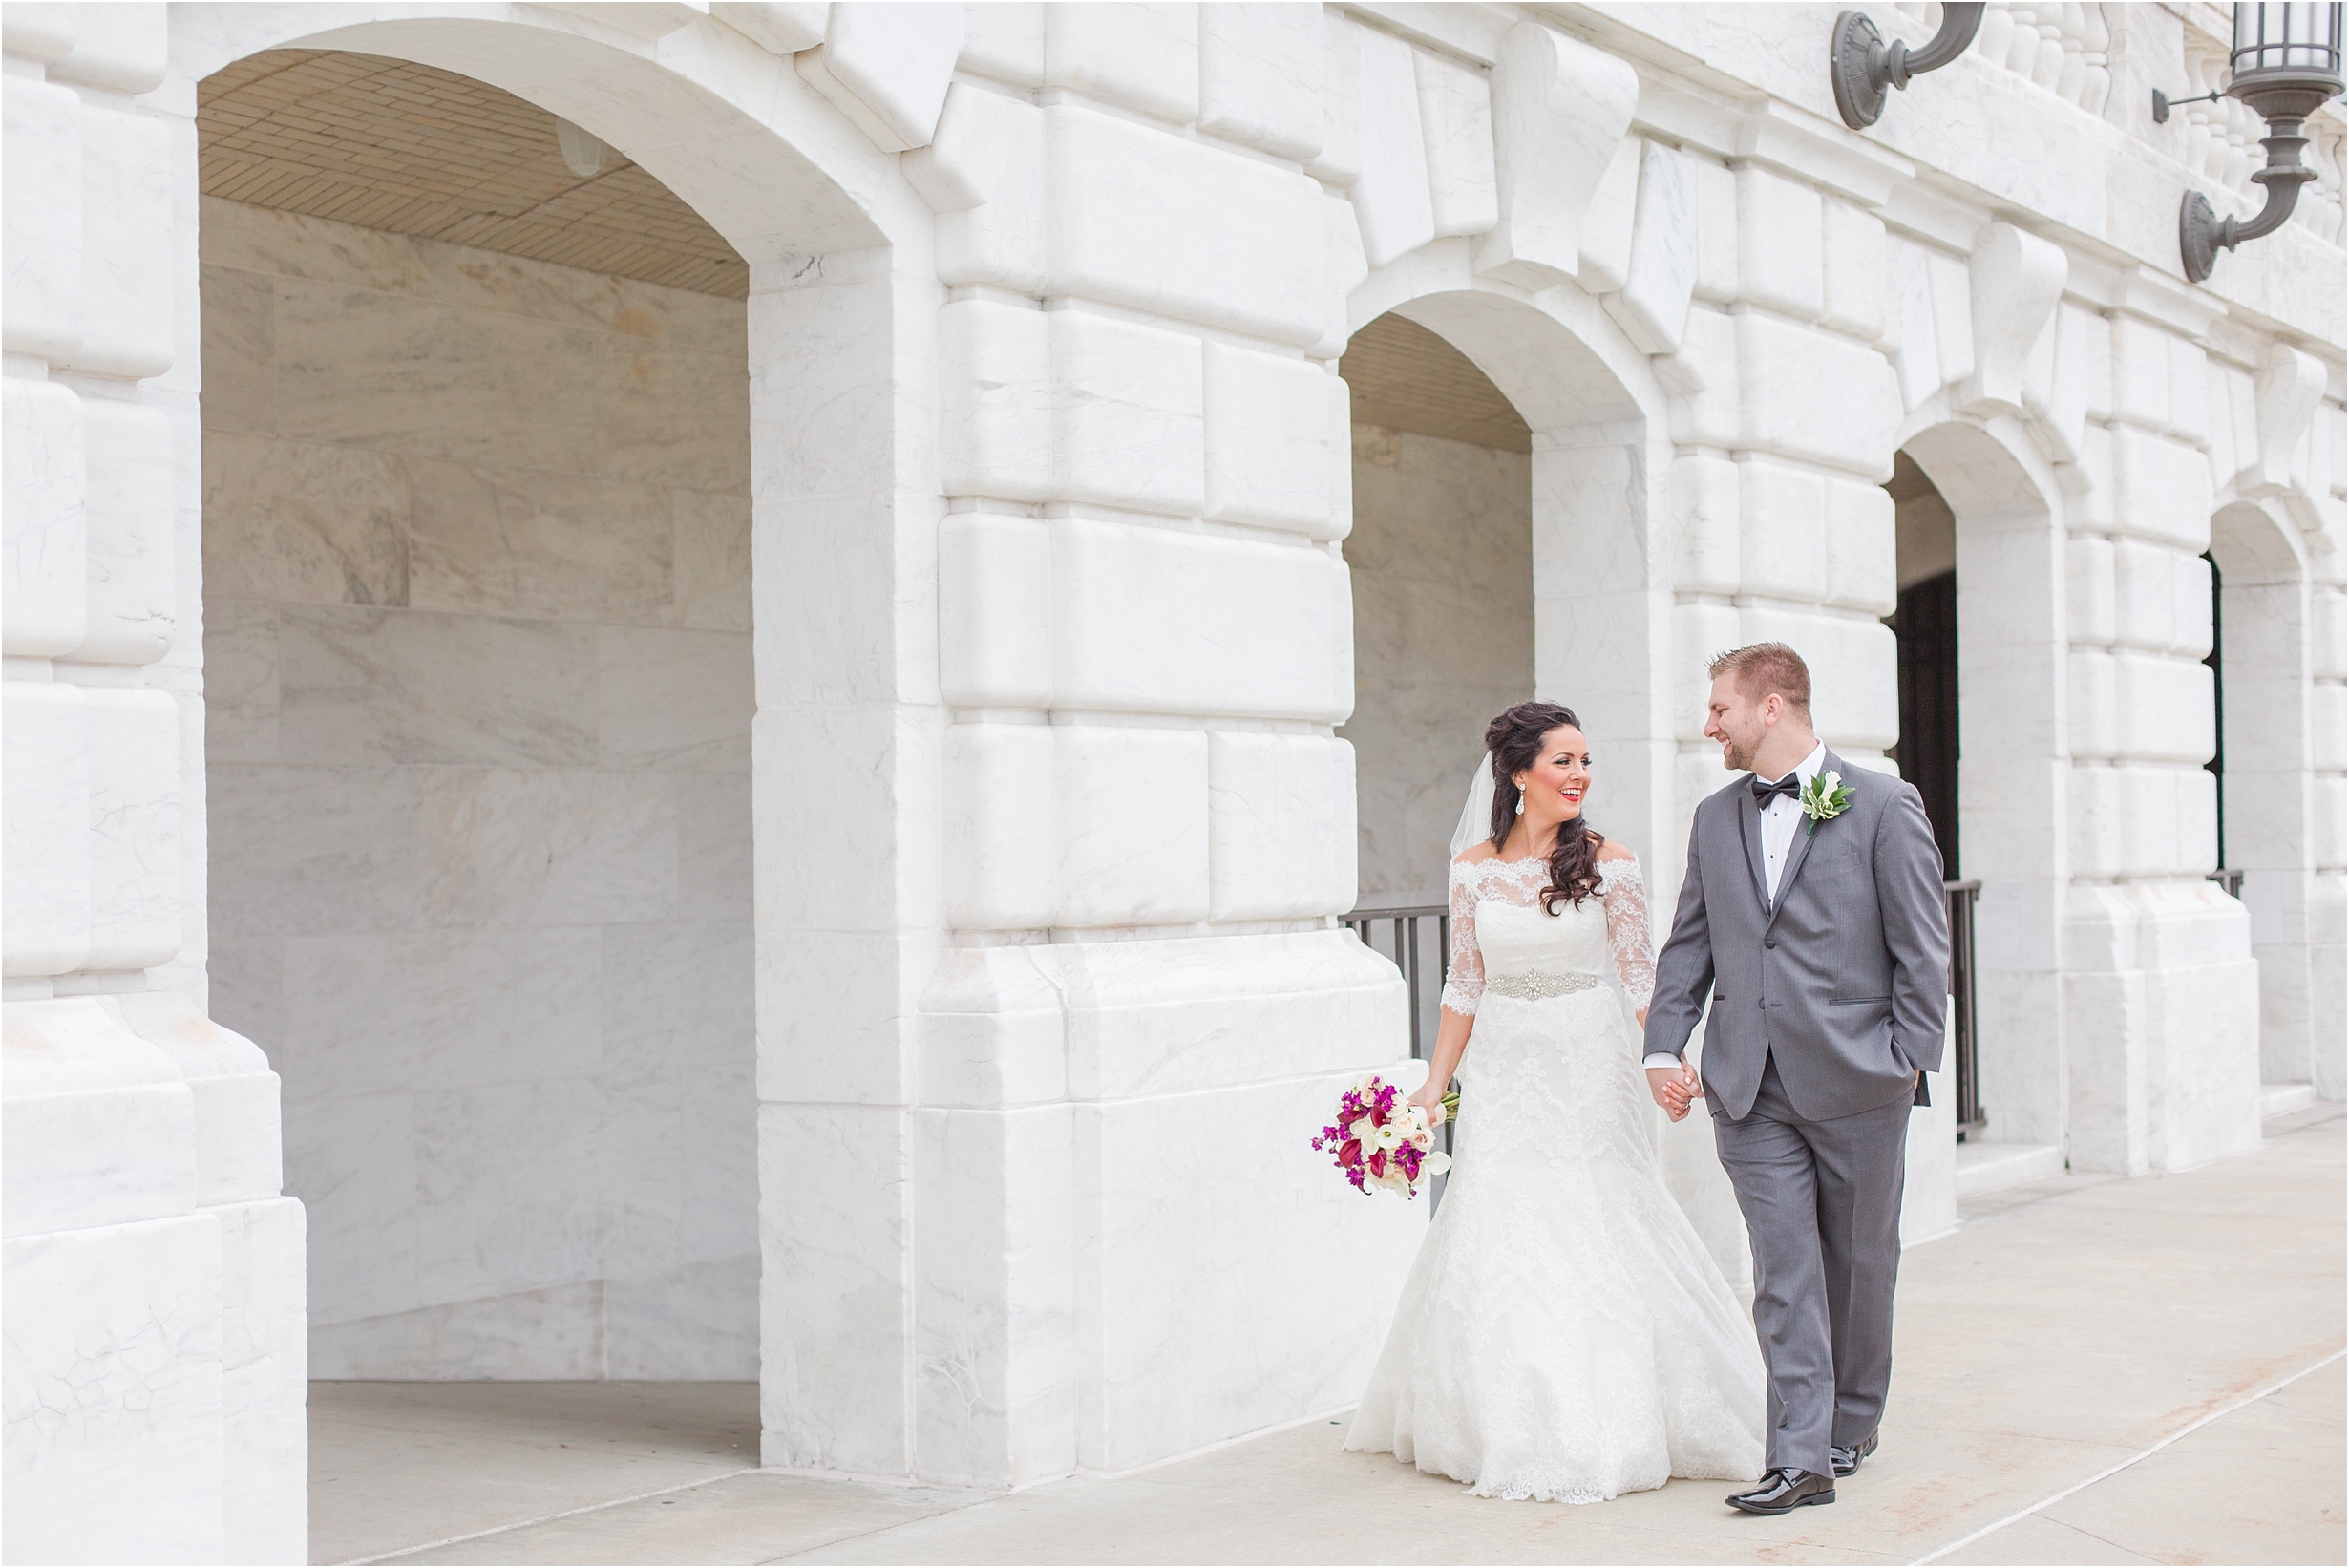 romantic-timeless-candid-wedding-photos-at-the-detroit-institute-of-arts-in-detroit-mi-by-courtney-carolyn-photography_0004.jpg